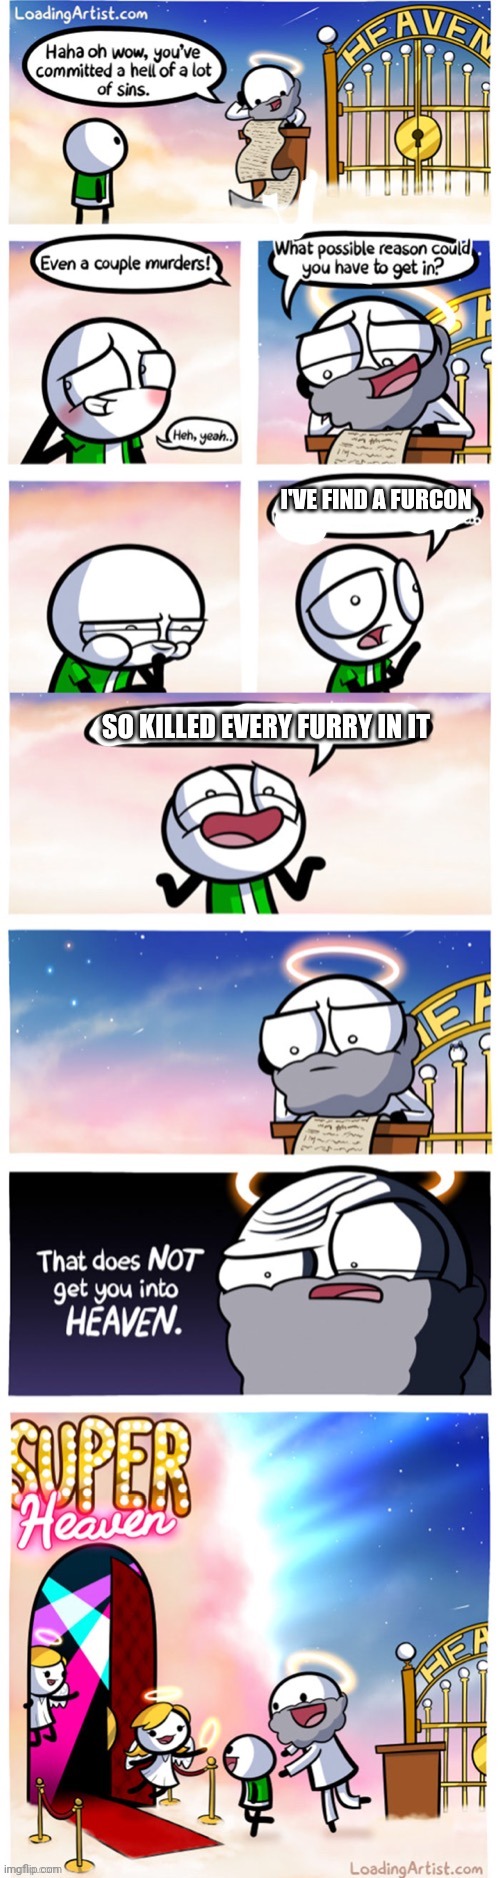 this is were anti-furrys go when they die | I'VE FIND A FURCON; SO KILLED EVERY FURRY IN IT | image tagged in super heaven,memes,anti furry,anti-furry,true thing | made w/ Imgflip meme maker